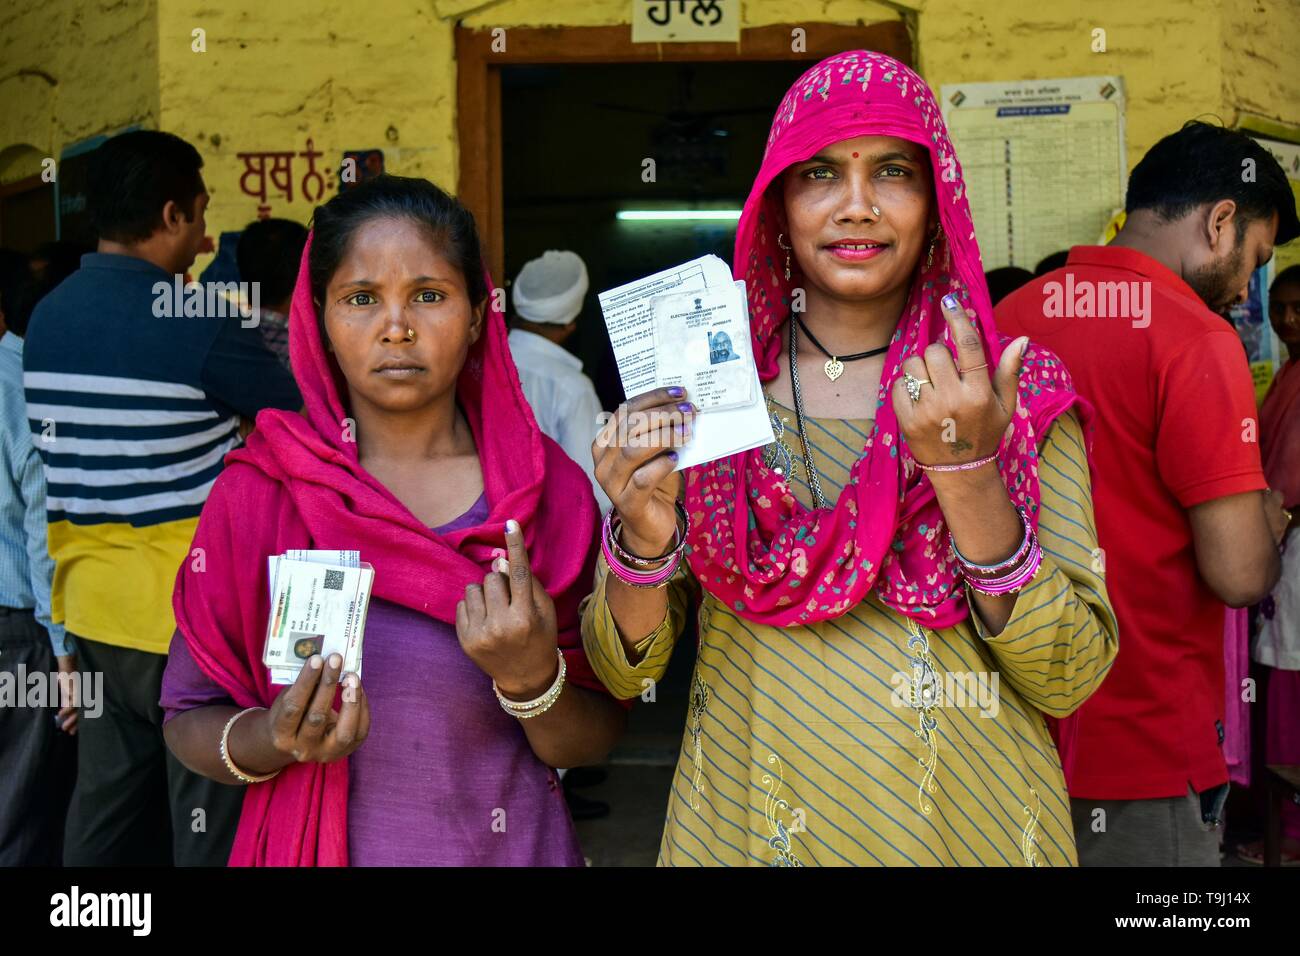 Patiala, Punjab, India. 19th May, 2019. Indian voters seen showing their identity card and ink finger after casting her vote at a polling station during the final phase of India's general election in Patiala district of Punjab.Voting has begun for the final phase of Lok Sabha elections in Punjab, Bihar, West Bengal, Madhya Pradesh, Uttar Pradesh, Himachal Pradesh, Jharkhand and Chandigarh. Over 10.01 lakh voters will decide the fate of 918 candidates. The counting of votes will take place on May 23, officials said. Credit: Saqib Majeed/SOPA Images/ZUMA Wire/Alamy Live News Stock Photo